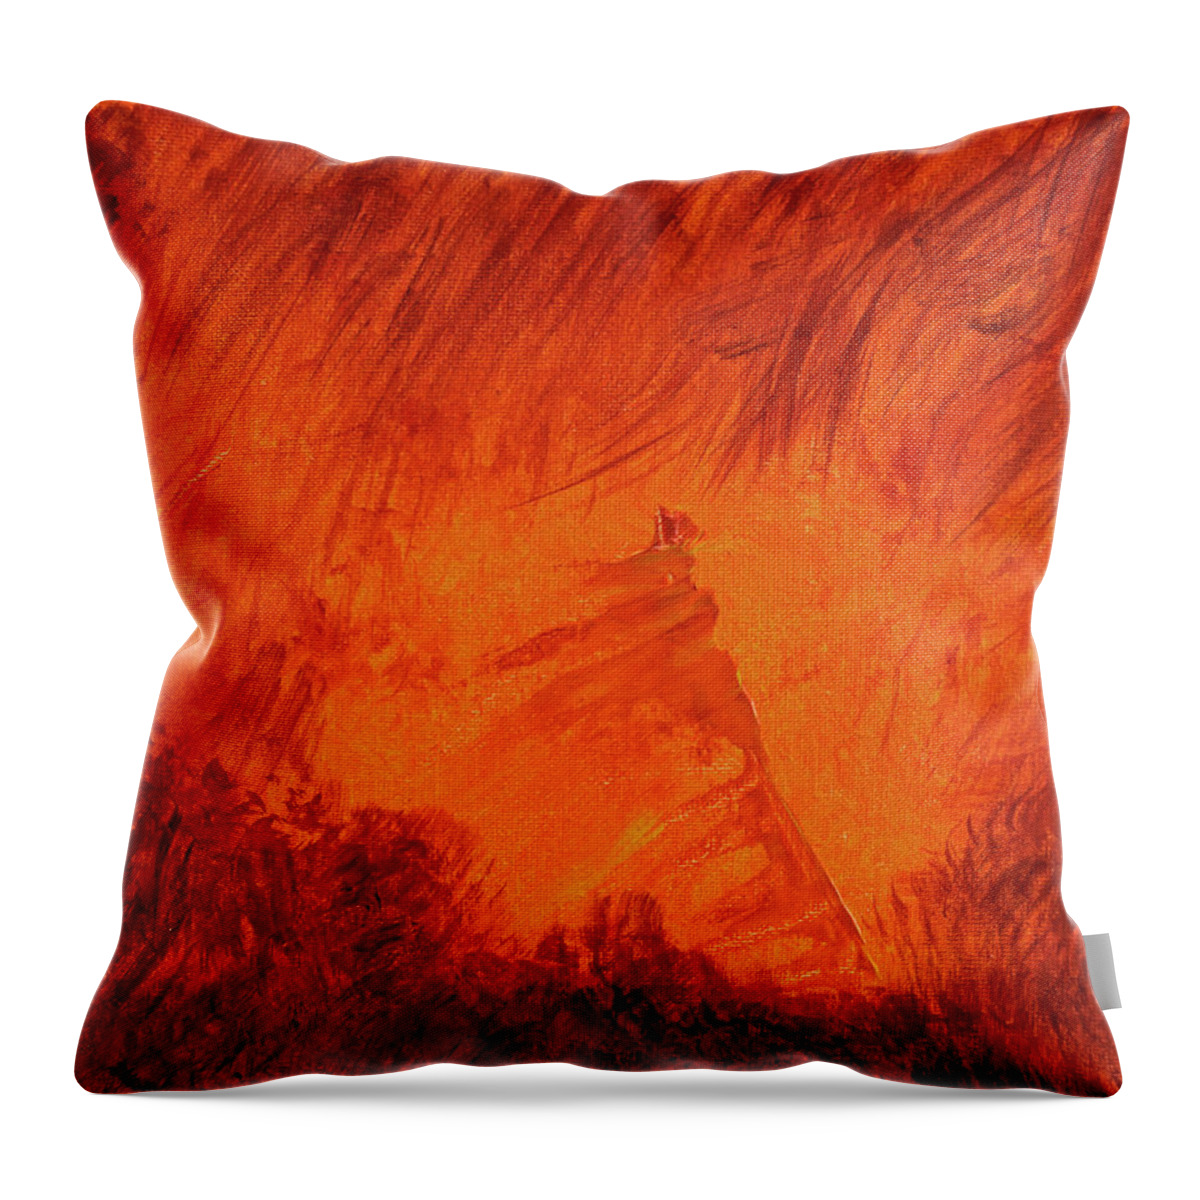 Admidst Throw Pillow featuring the painting Amidst The Inferno by Joe Loffredo